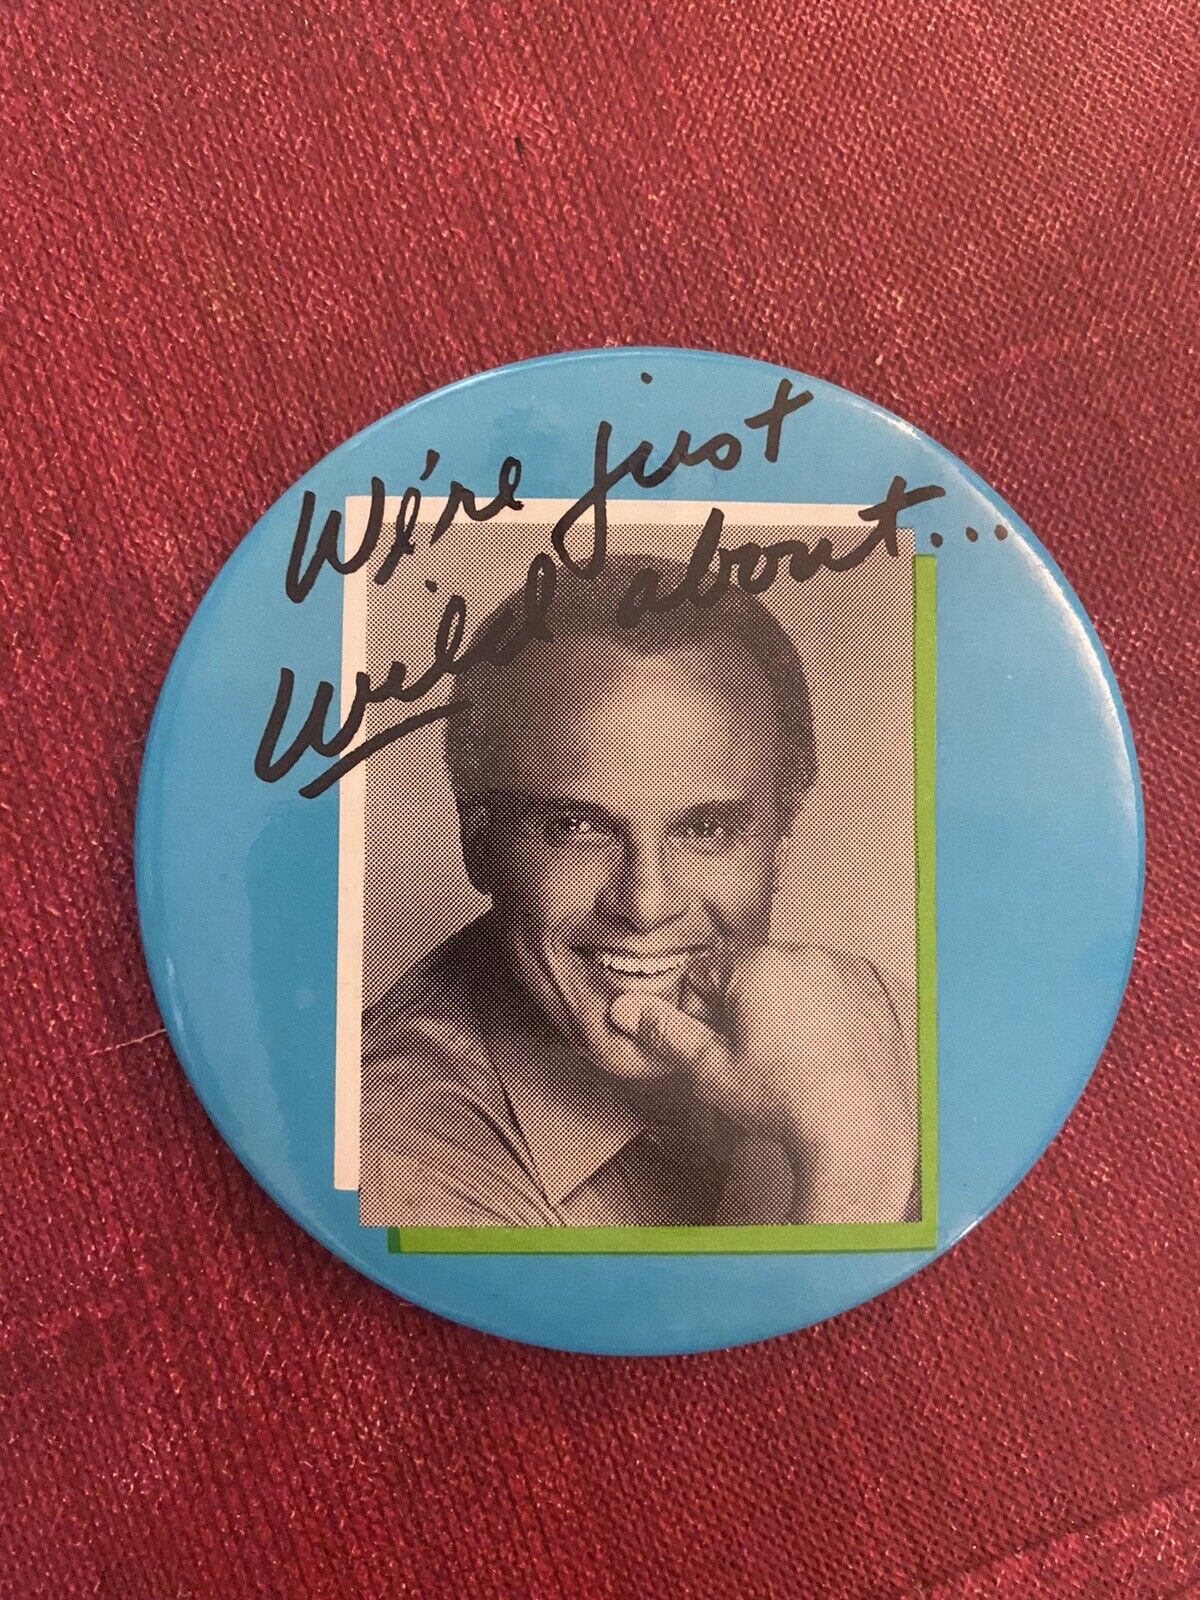 Harry Belafonte pre owned button pin large 3.5 inch